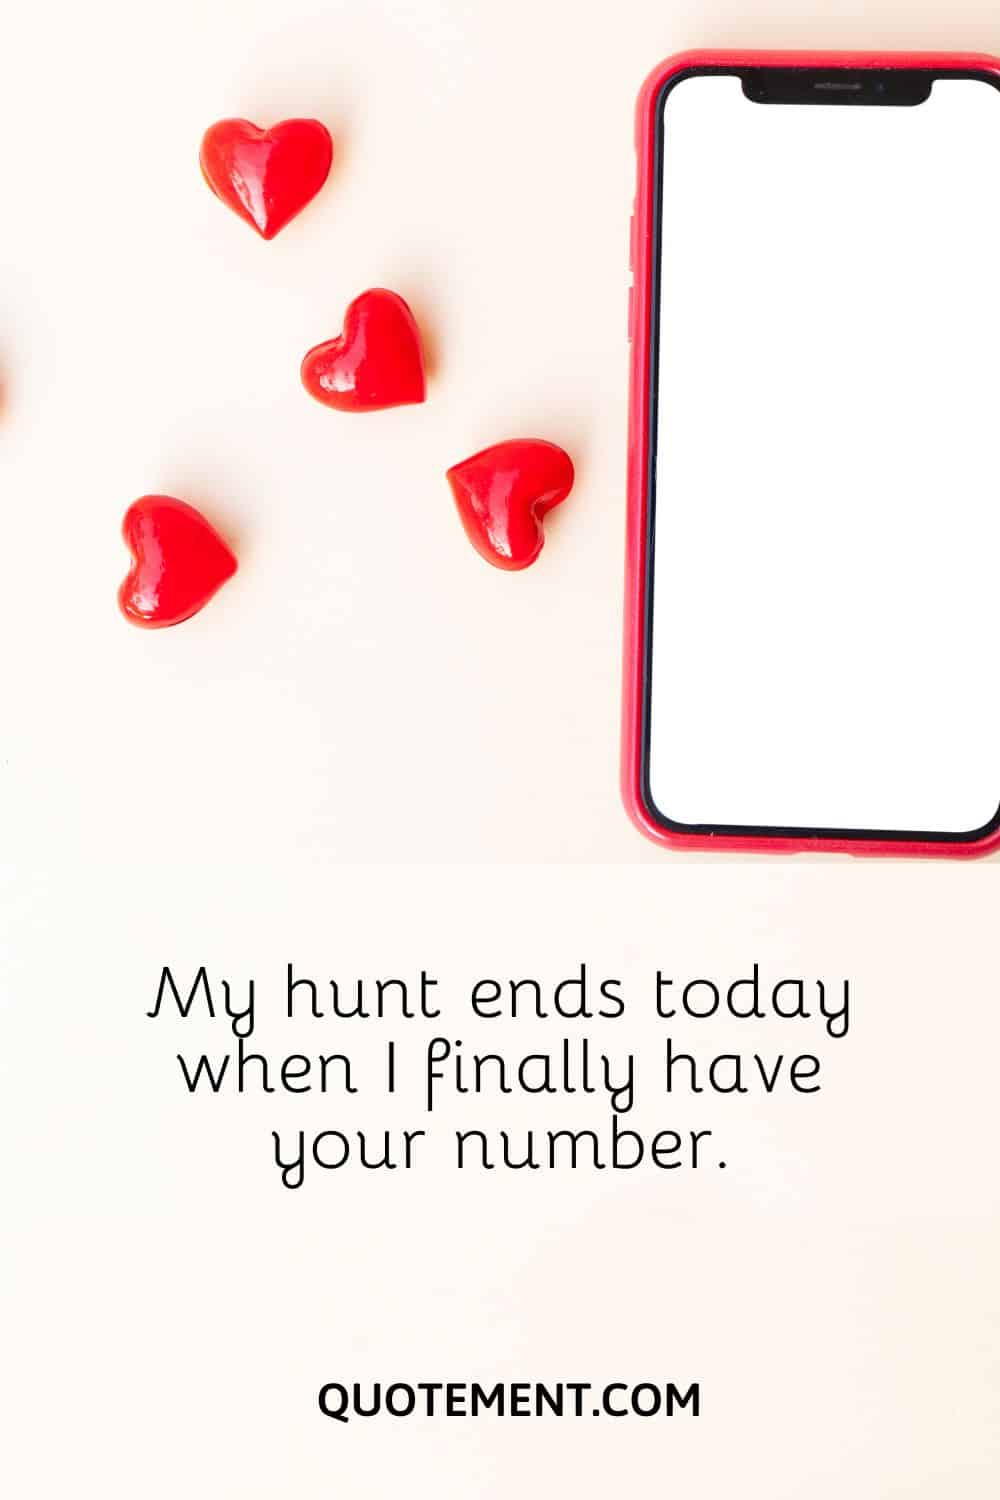 My hunt ends today when I finally have your number